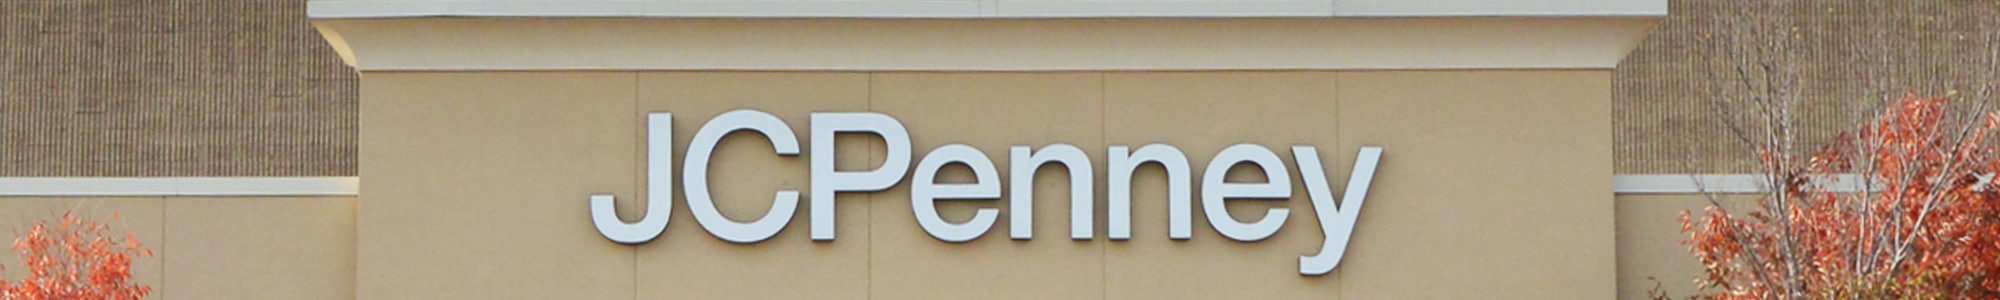 JCPenney banner image